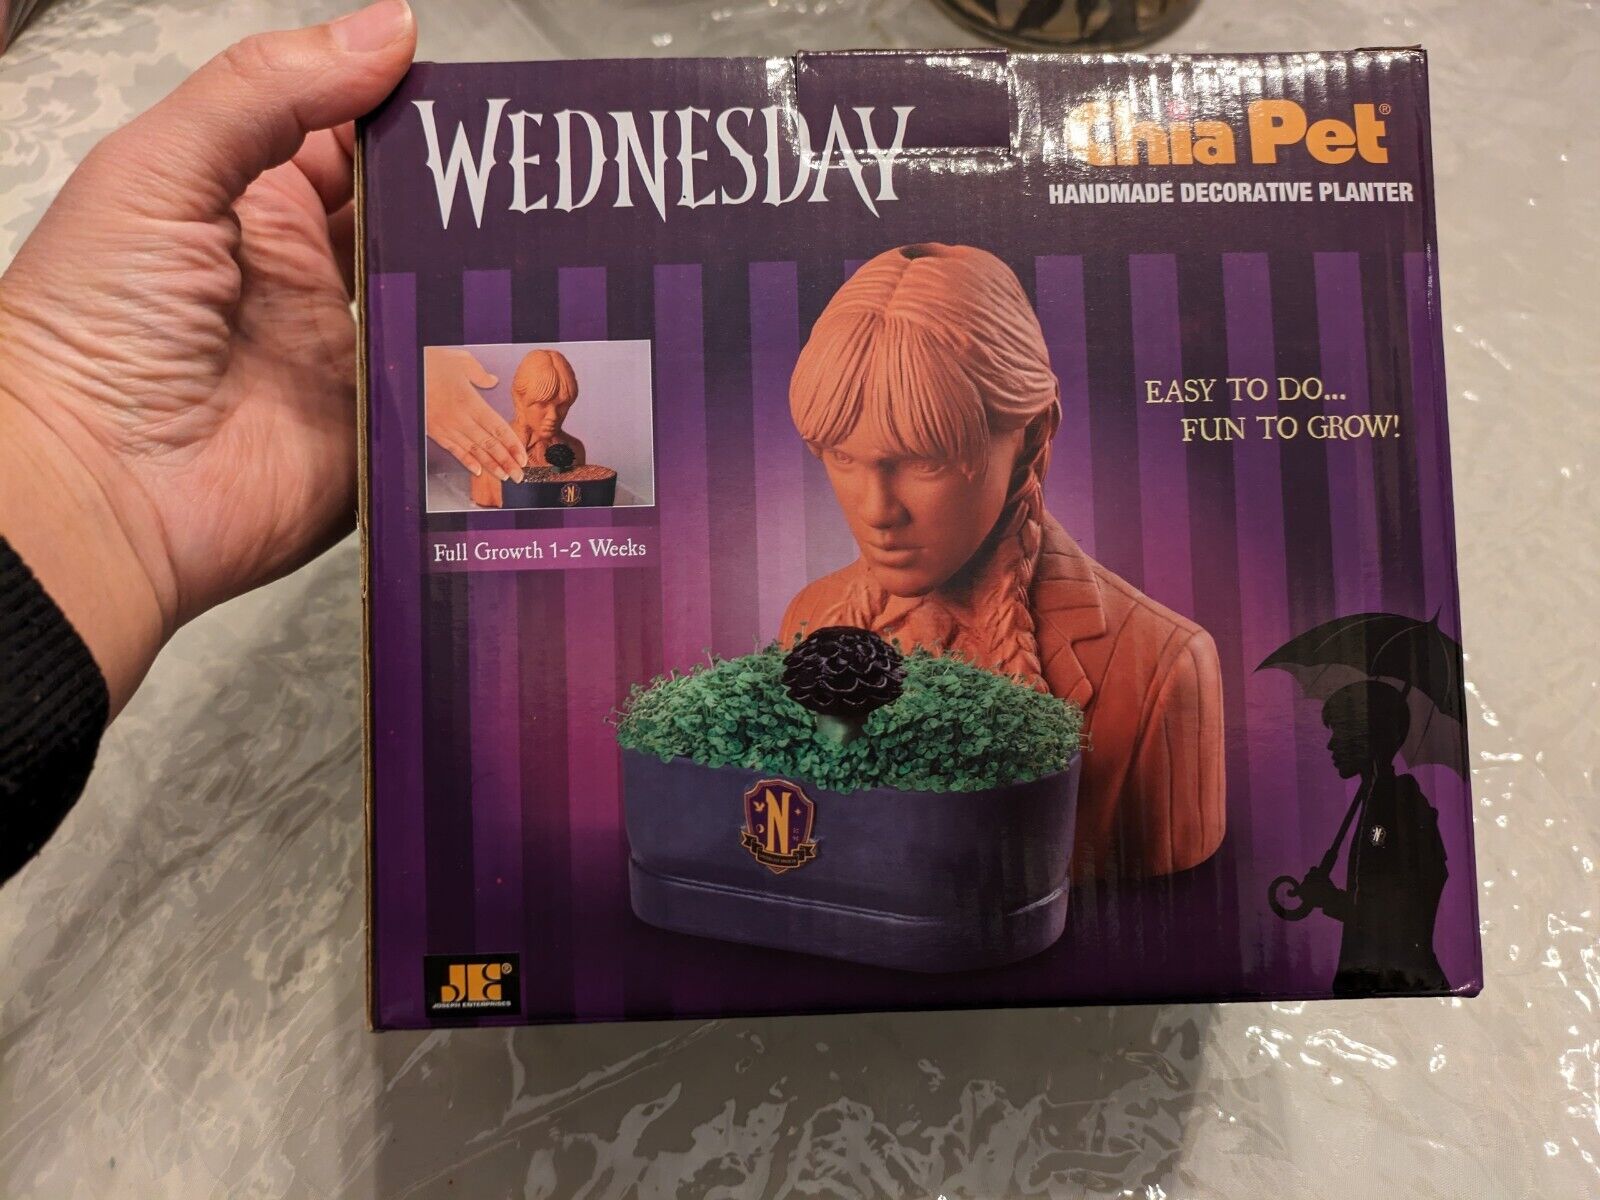 New In Box, Chia Pet Wednesday with Seed Pack, Decorative Pottery Planter